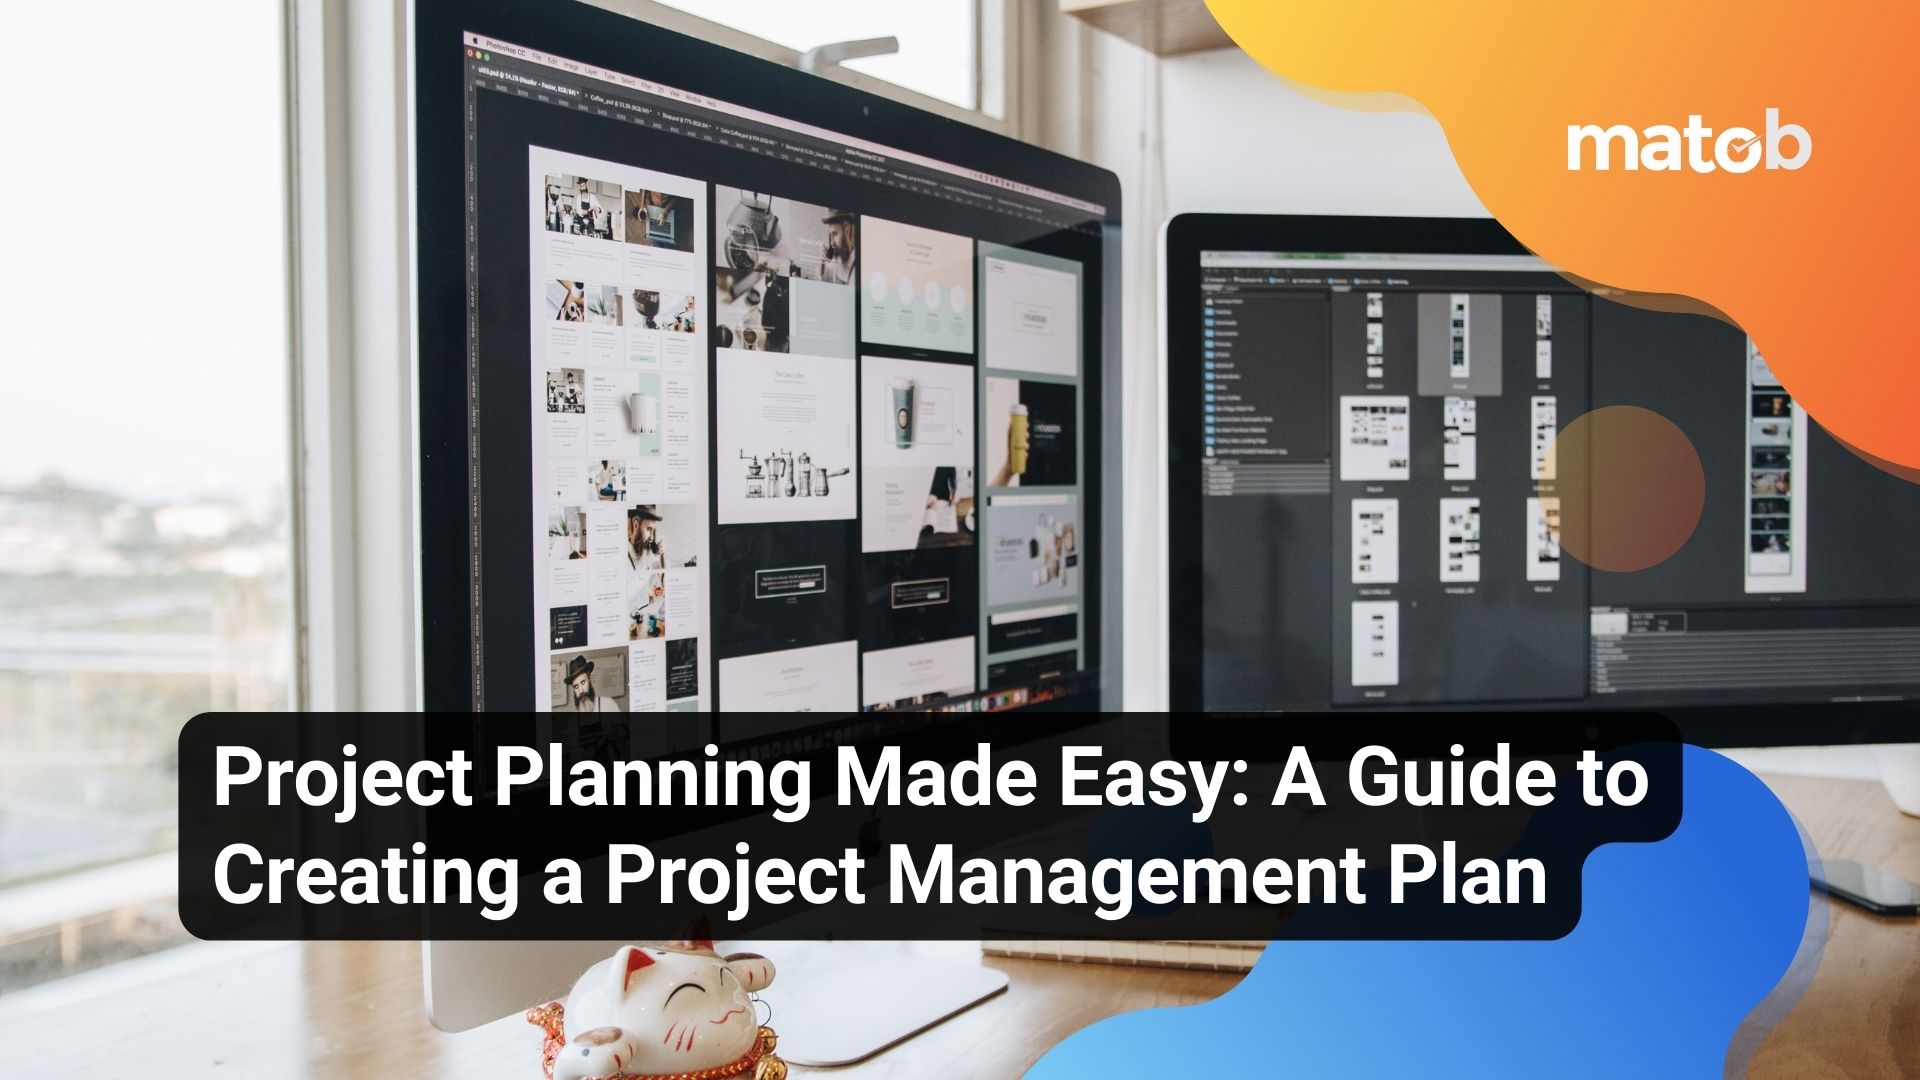 Project Planning Made Easy: A Guide to Creating a Project Management Plan